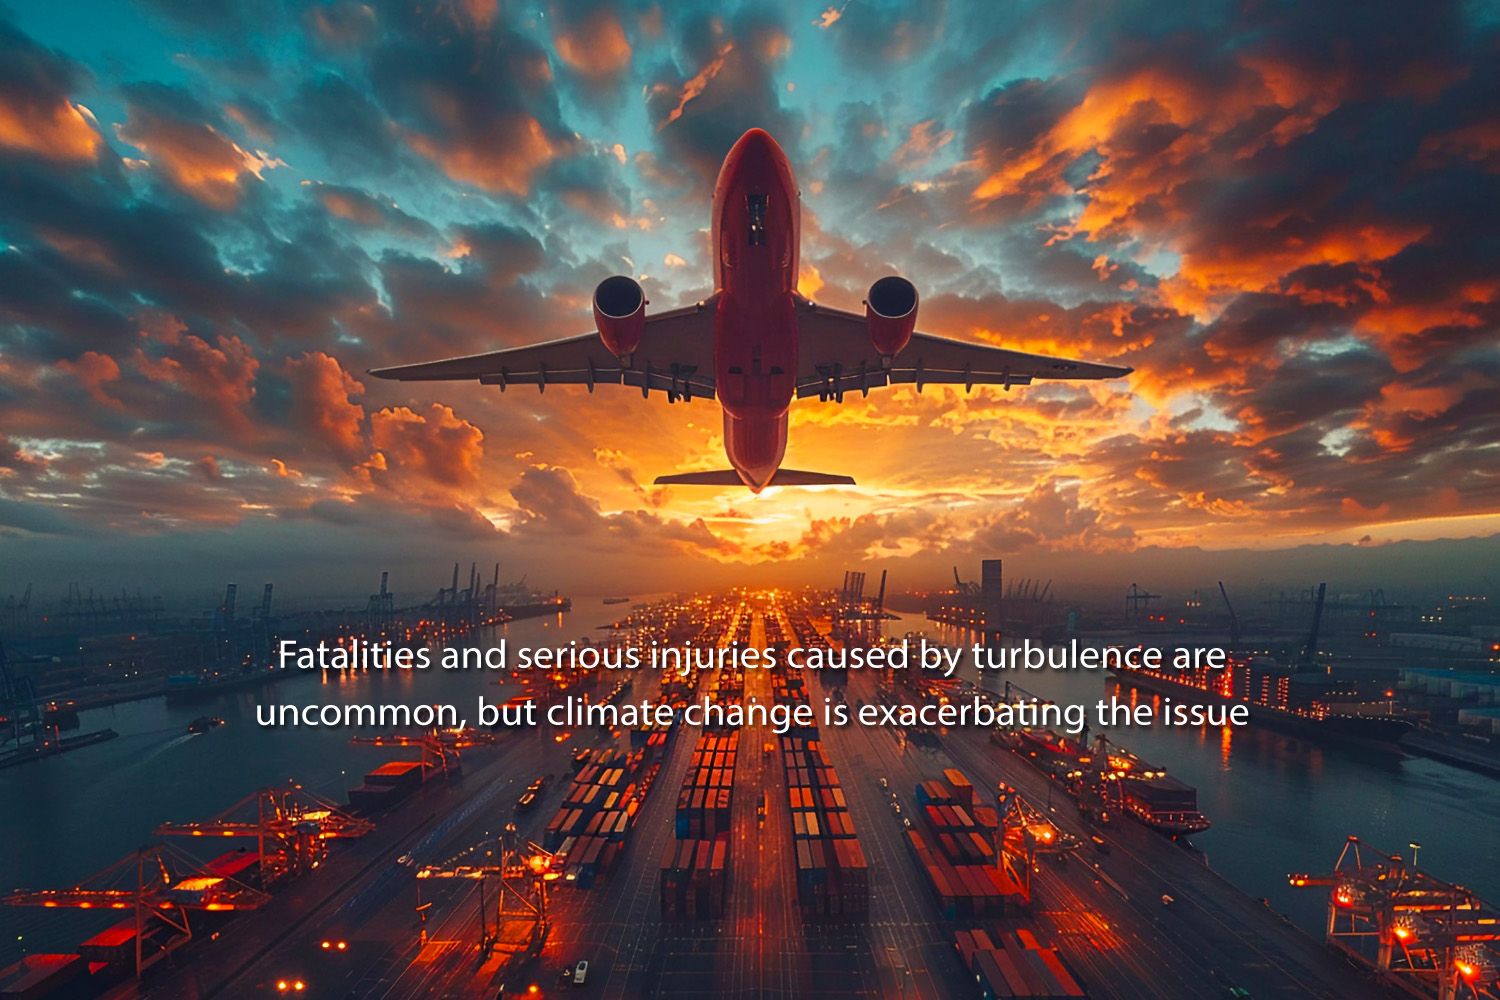 Fatalities and serious injuries caused by turbulence are uncommon, but climate change is exacerbating the issue